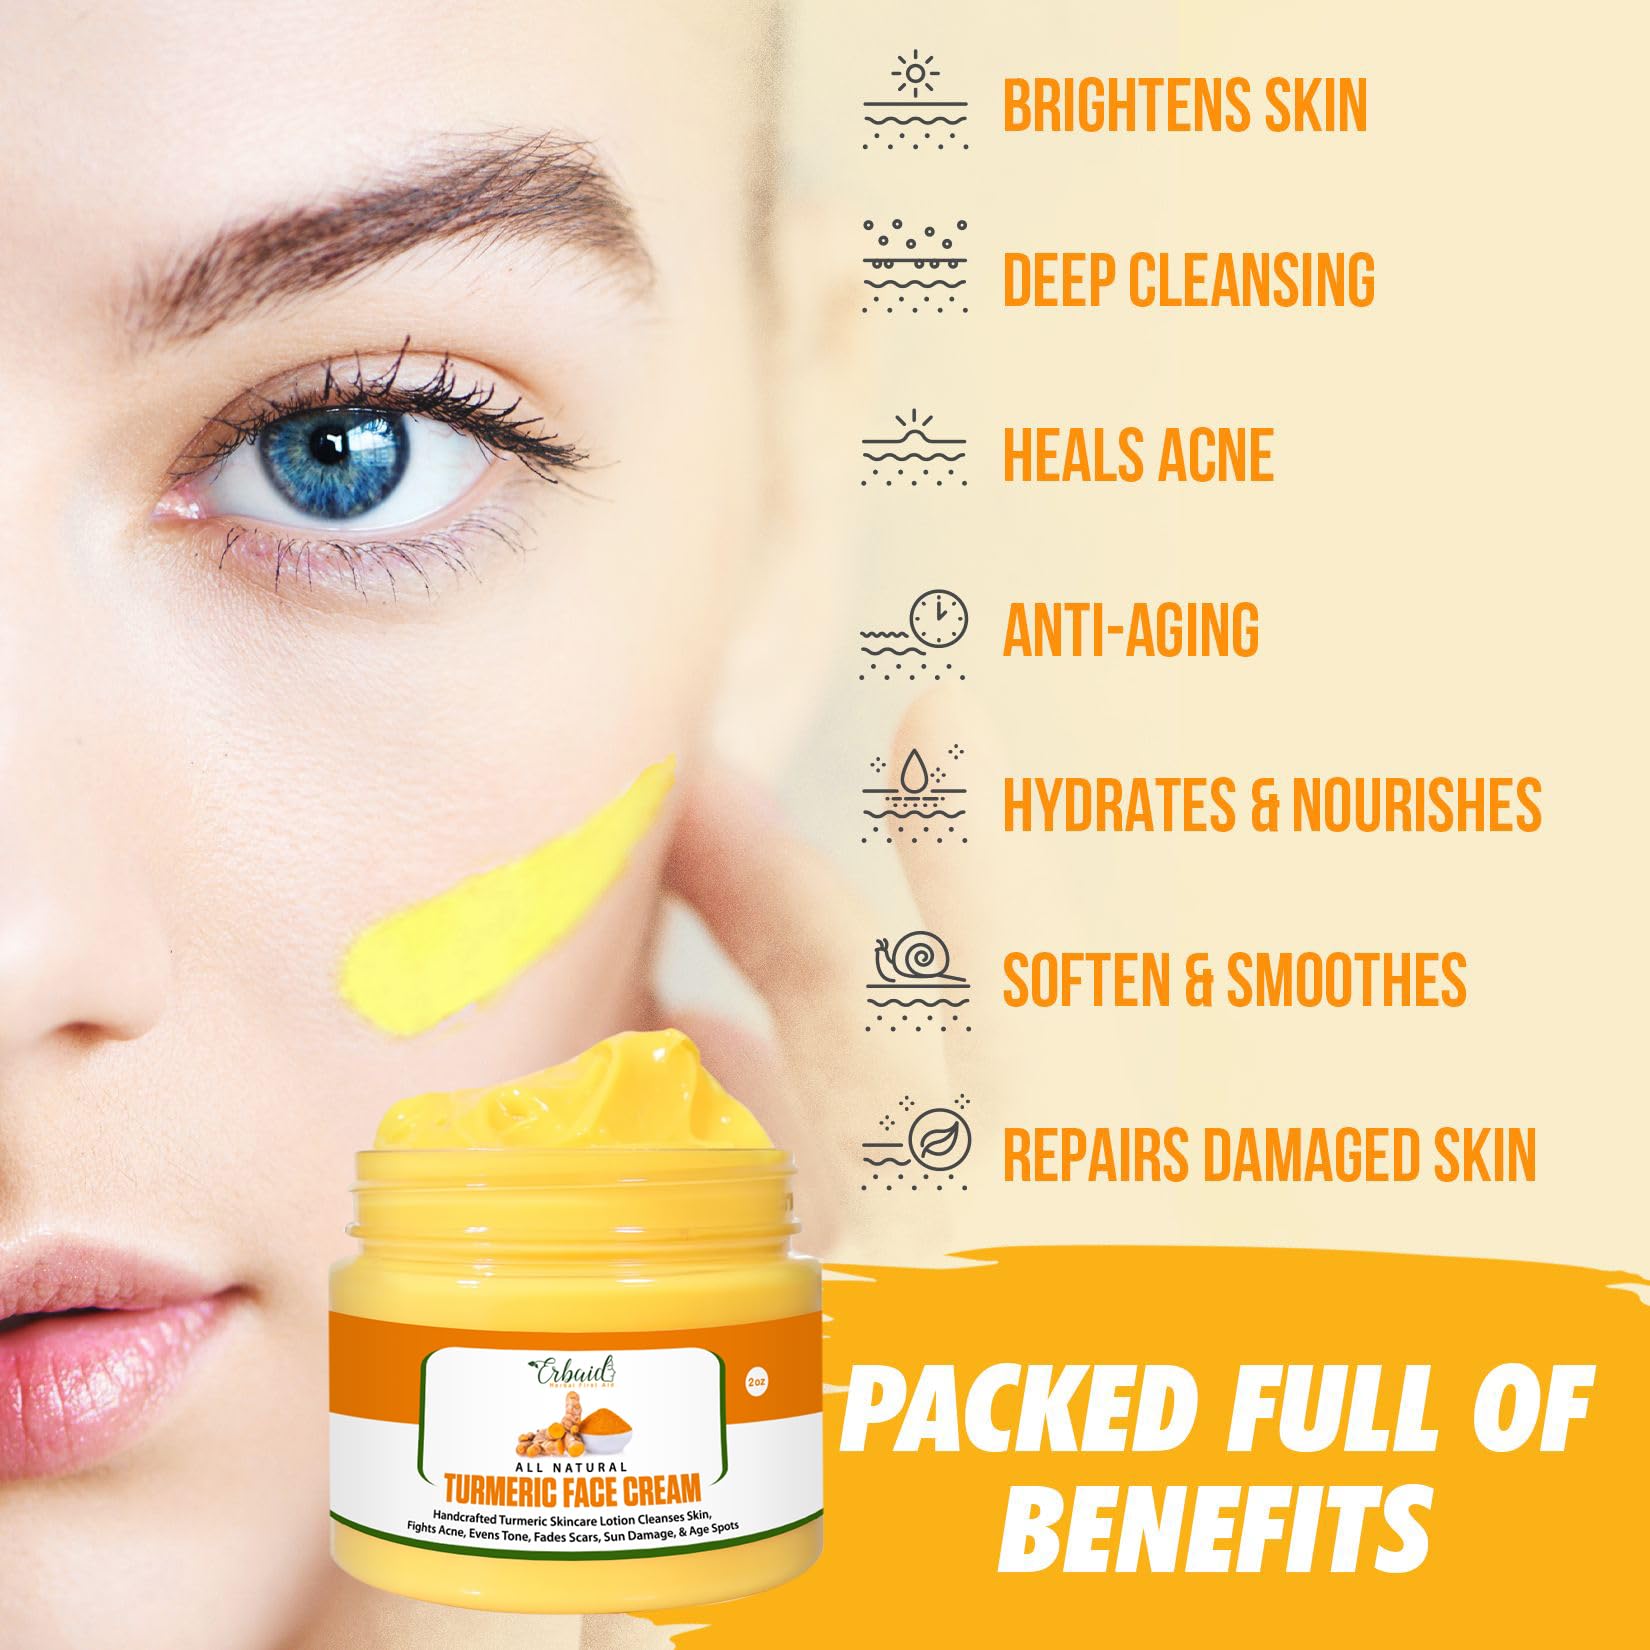 Turmeric Face Cream for Face & Body - All Natural Turmeric Skin Brightening Lotion - Turmeric Cleanses Skin, Fights Acne, Evens Tone, Fades Scars, Sun Damage, & Age Spots - Handcrafted Made in USA